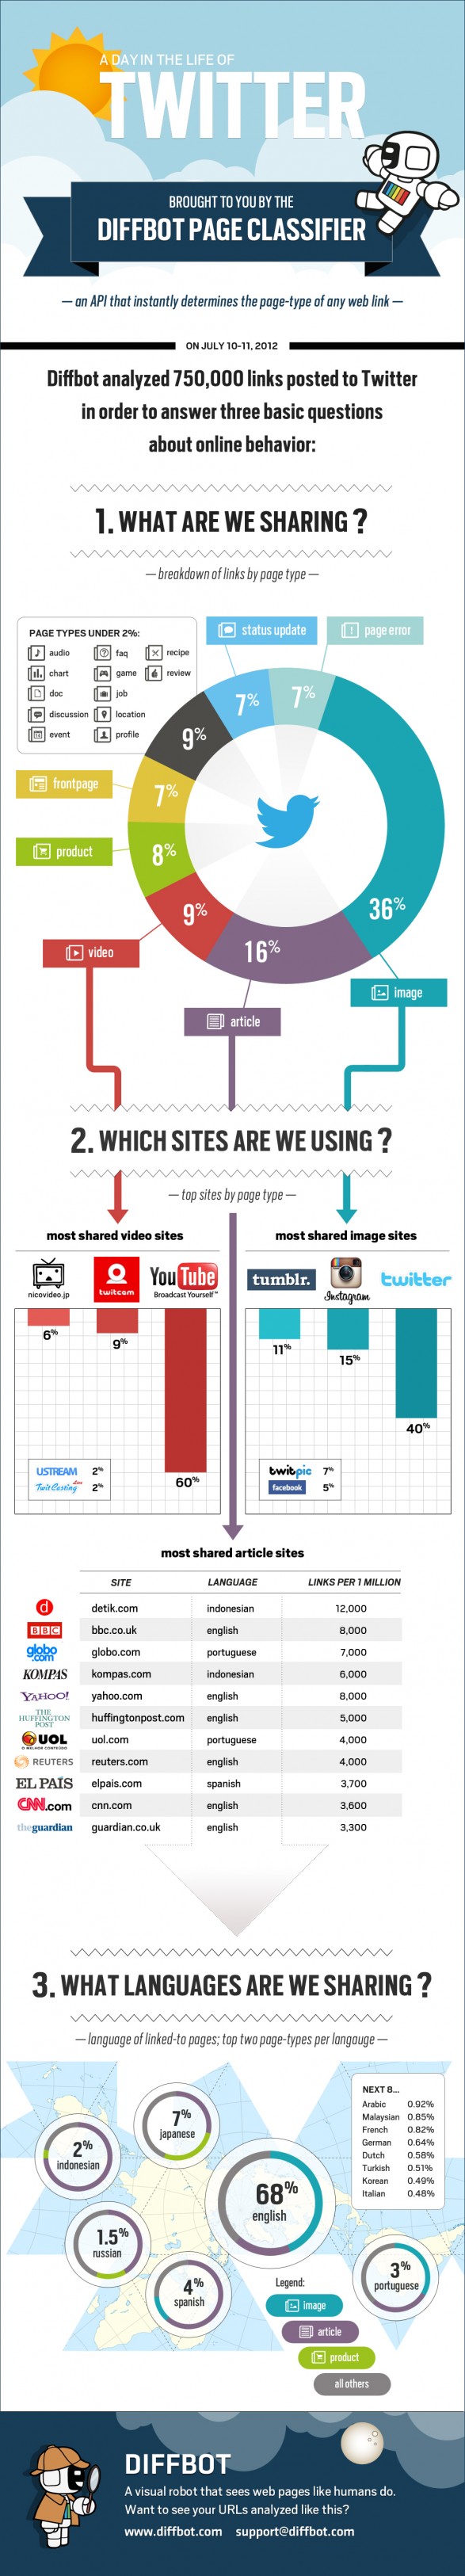 What Kind of Links Are Shared on Twitter?